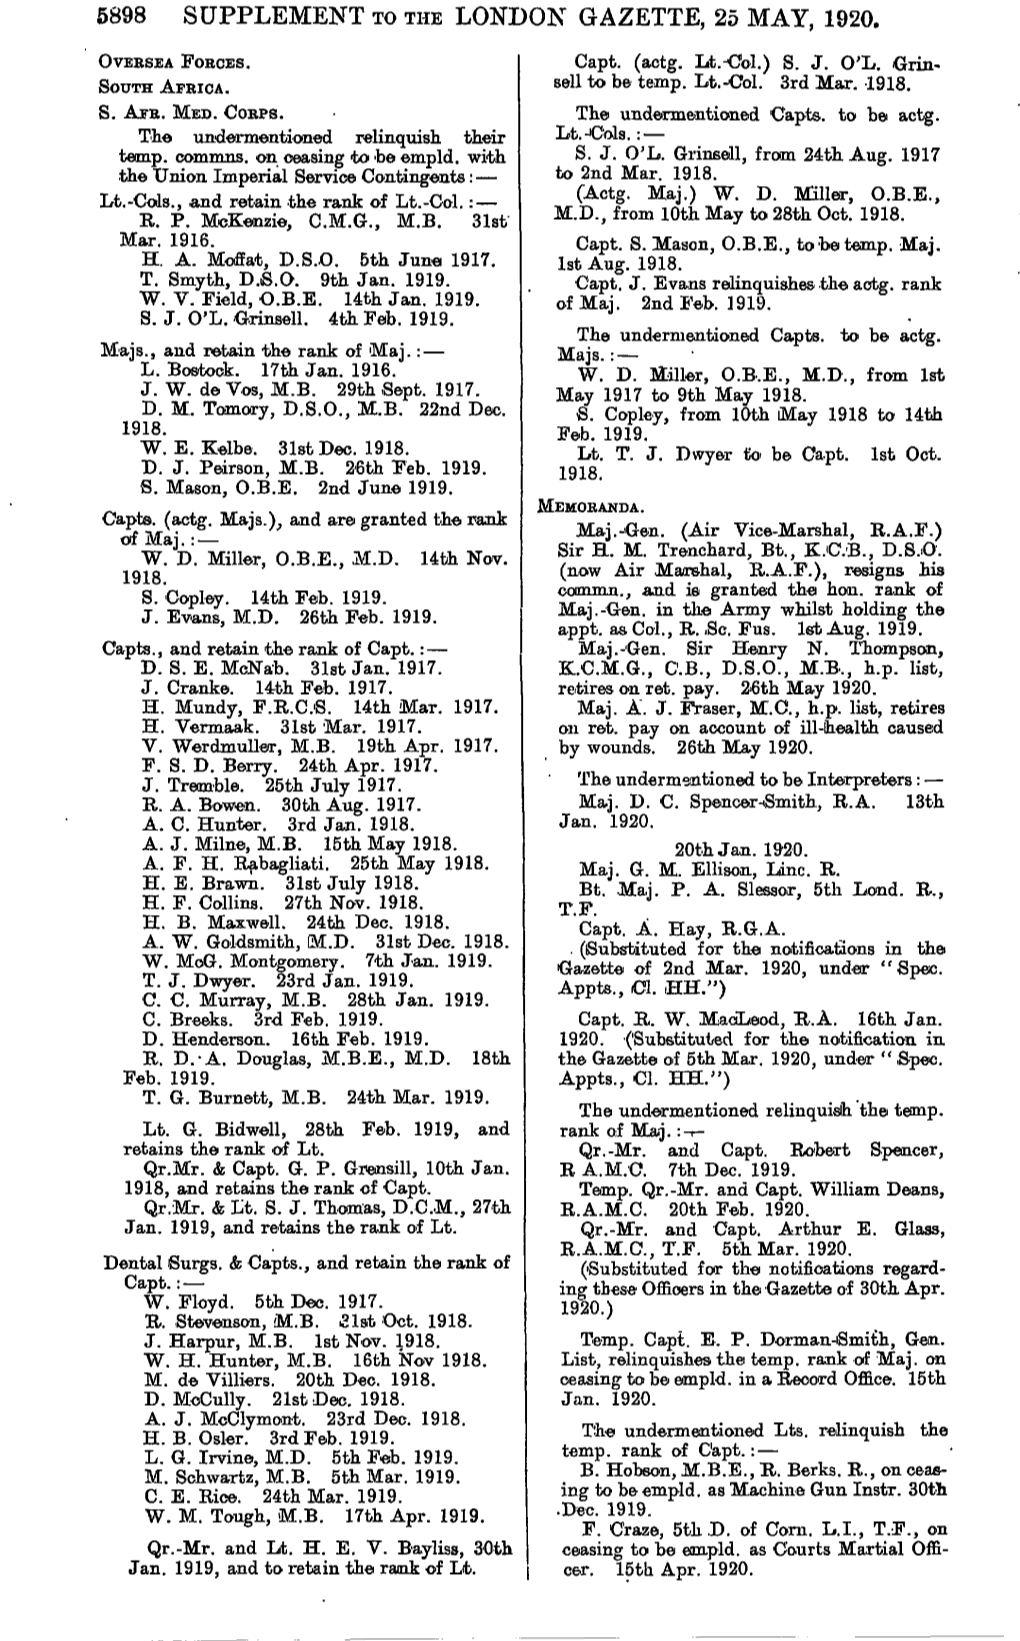 5898 Supplement to the London Gazette, 25 May, 1920. Oveesea Forces